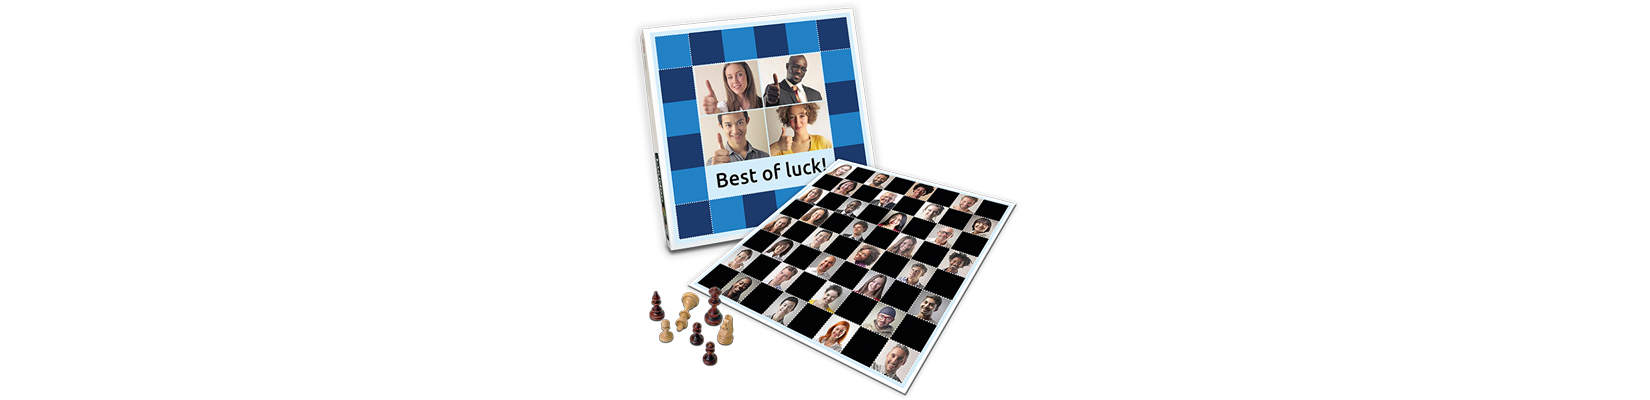 LUUDOO's customised chess makes for a great leaving gift when needing to place lots of pictures of workmates